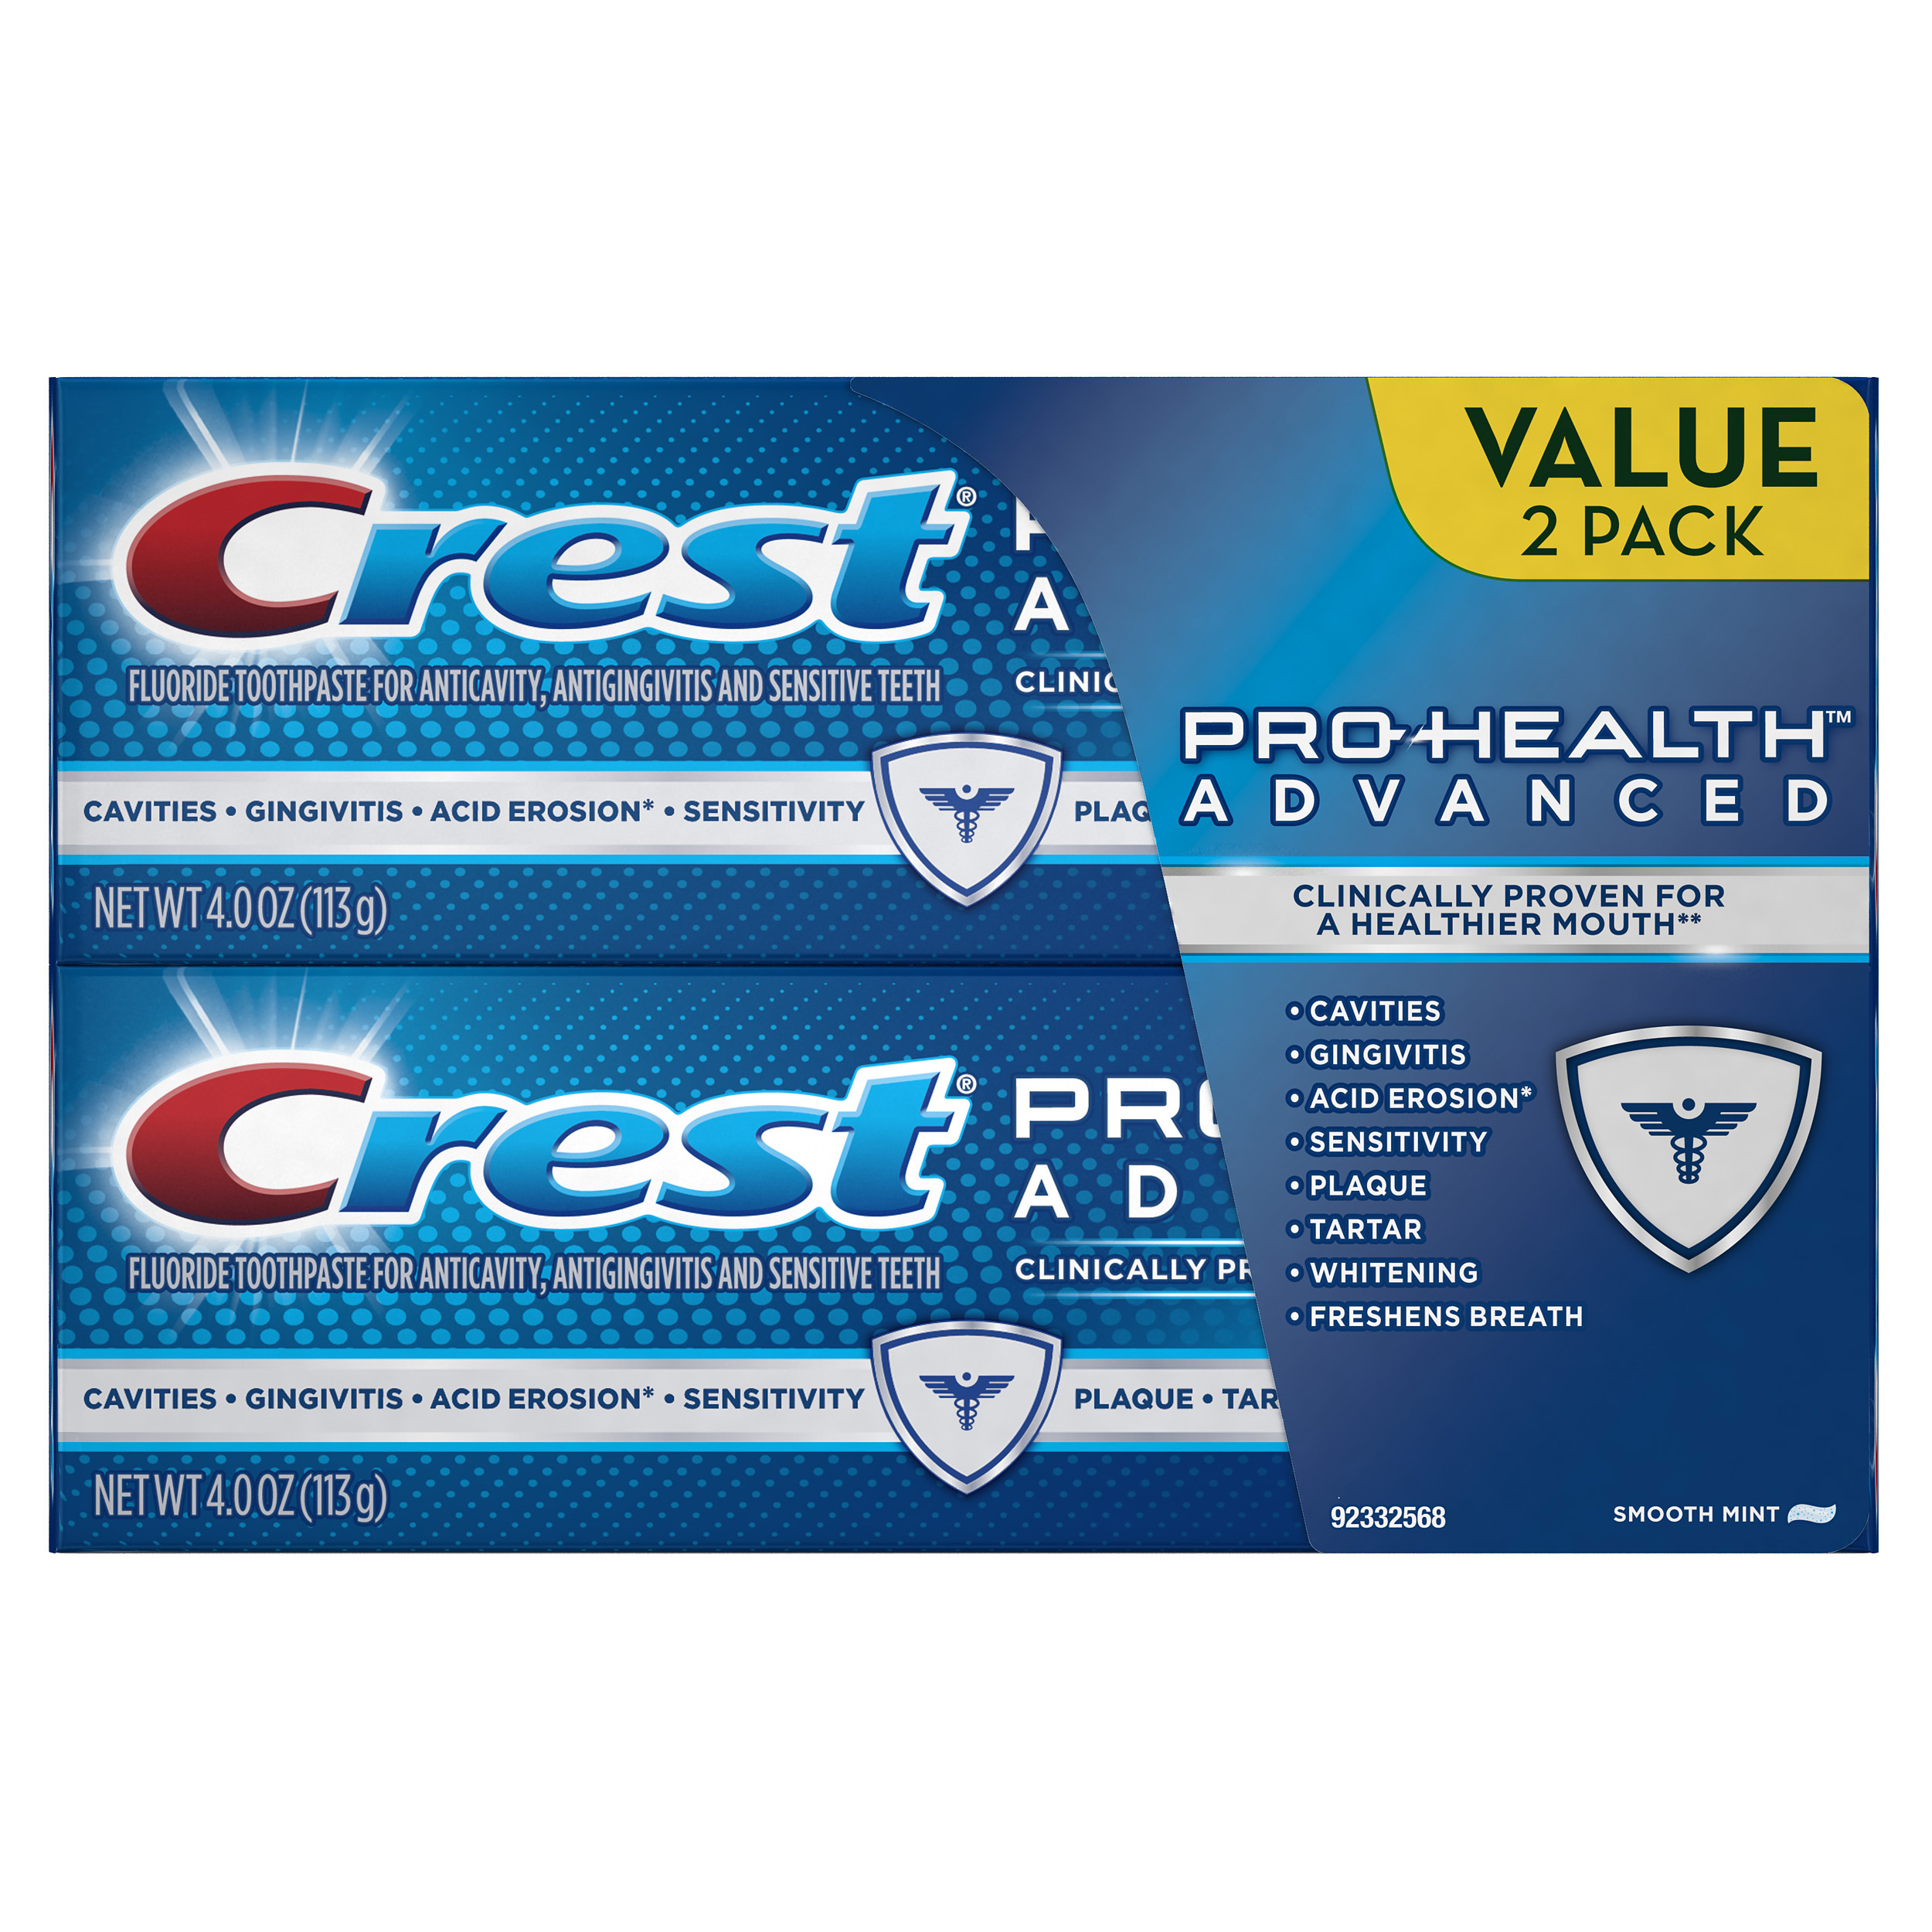 Crest Pro-Health Advanced Soothing Smooth Mint Toothpaste 8.0 oz. 2 Count - image 1 of 9